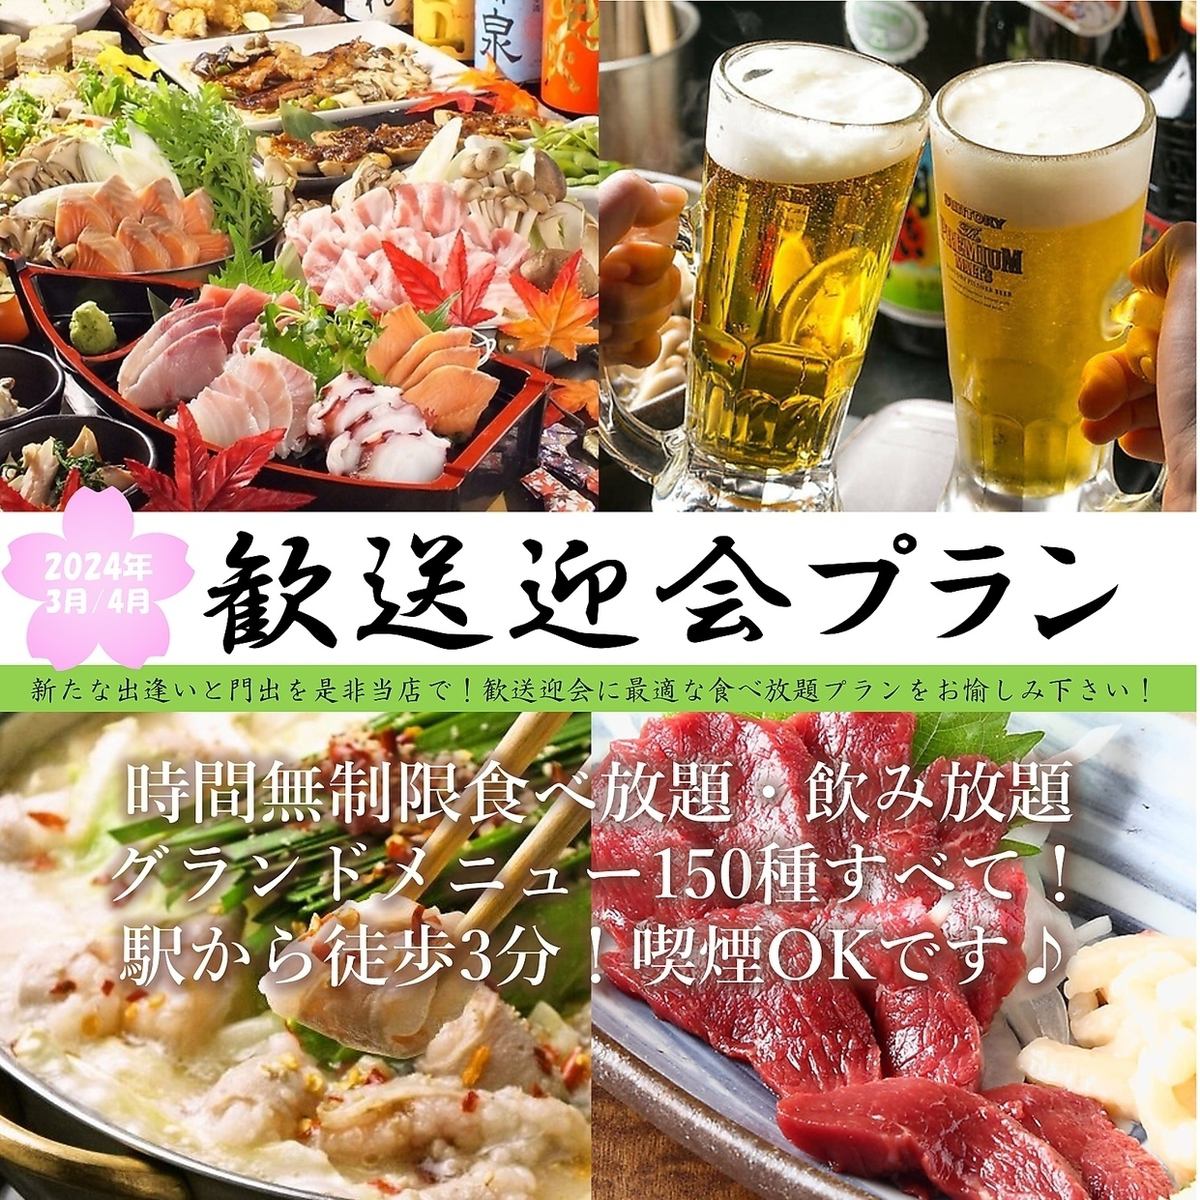 A 3-minute walk from Yokohama Station ◎ All-you-can-eat, all-you-can-drink izakaya with 150 dishes and no time limit!